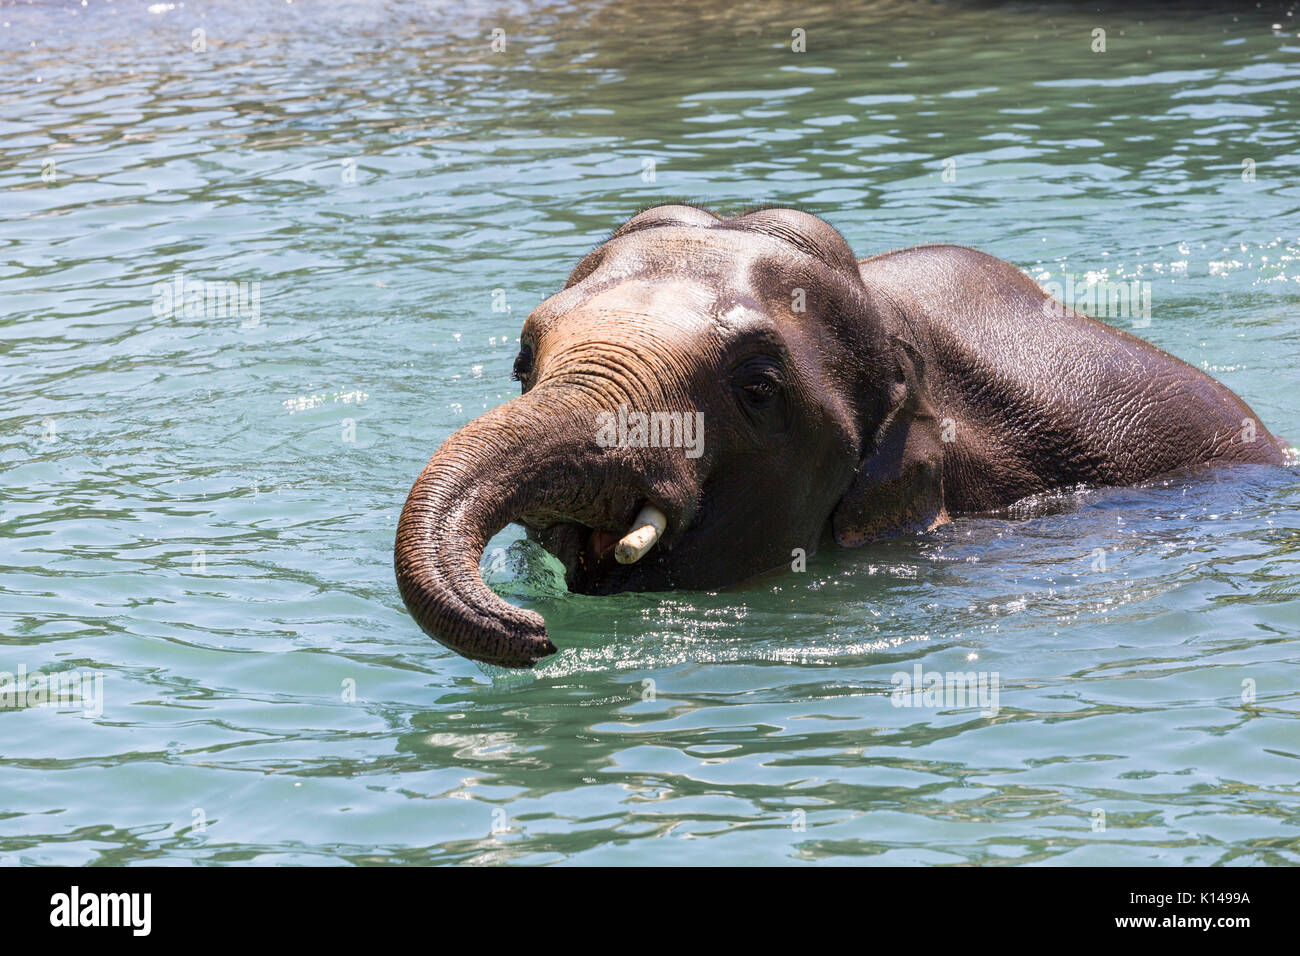 Elephant in the water at the Portland Oregon zoo Stock Photo